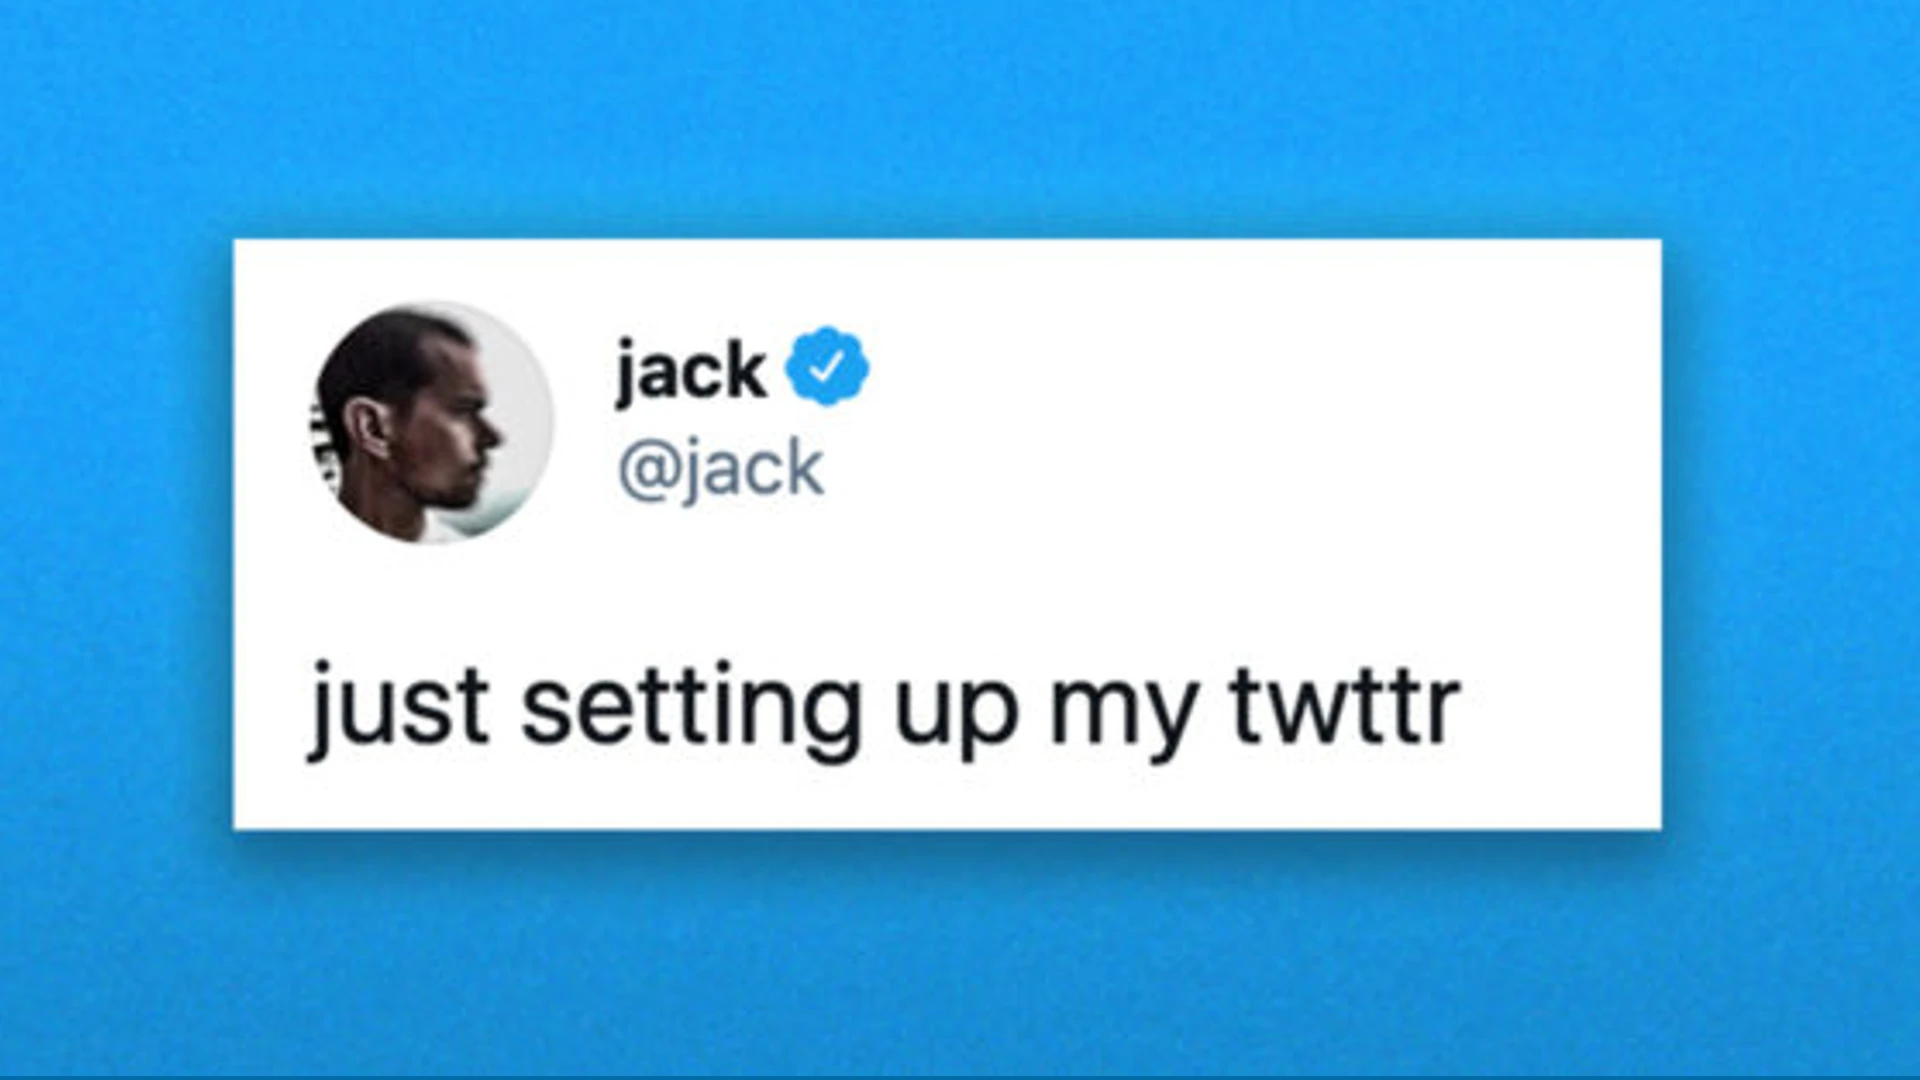 NFT of Jack Dorsey’s Initial tweet is currently worth $7,000, a drop from $2.9M